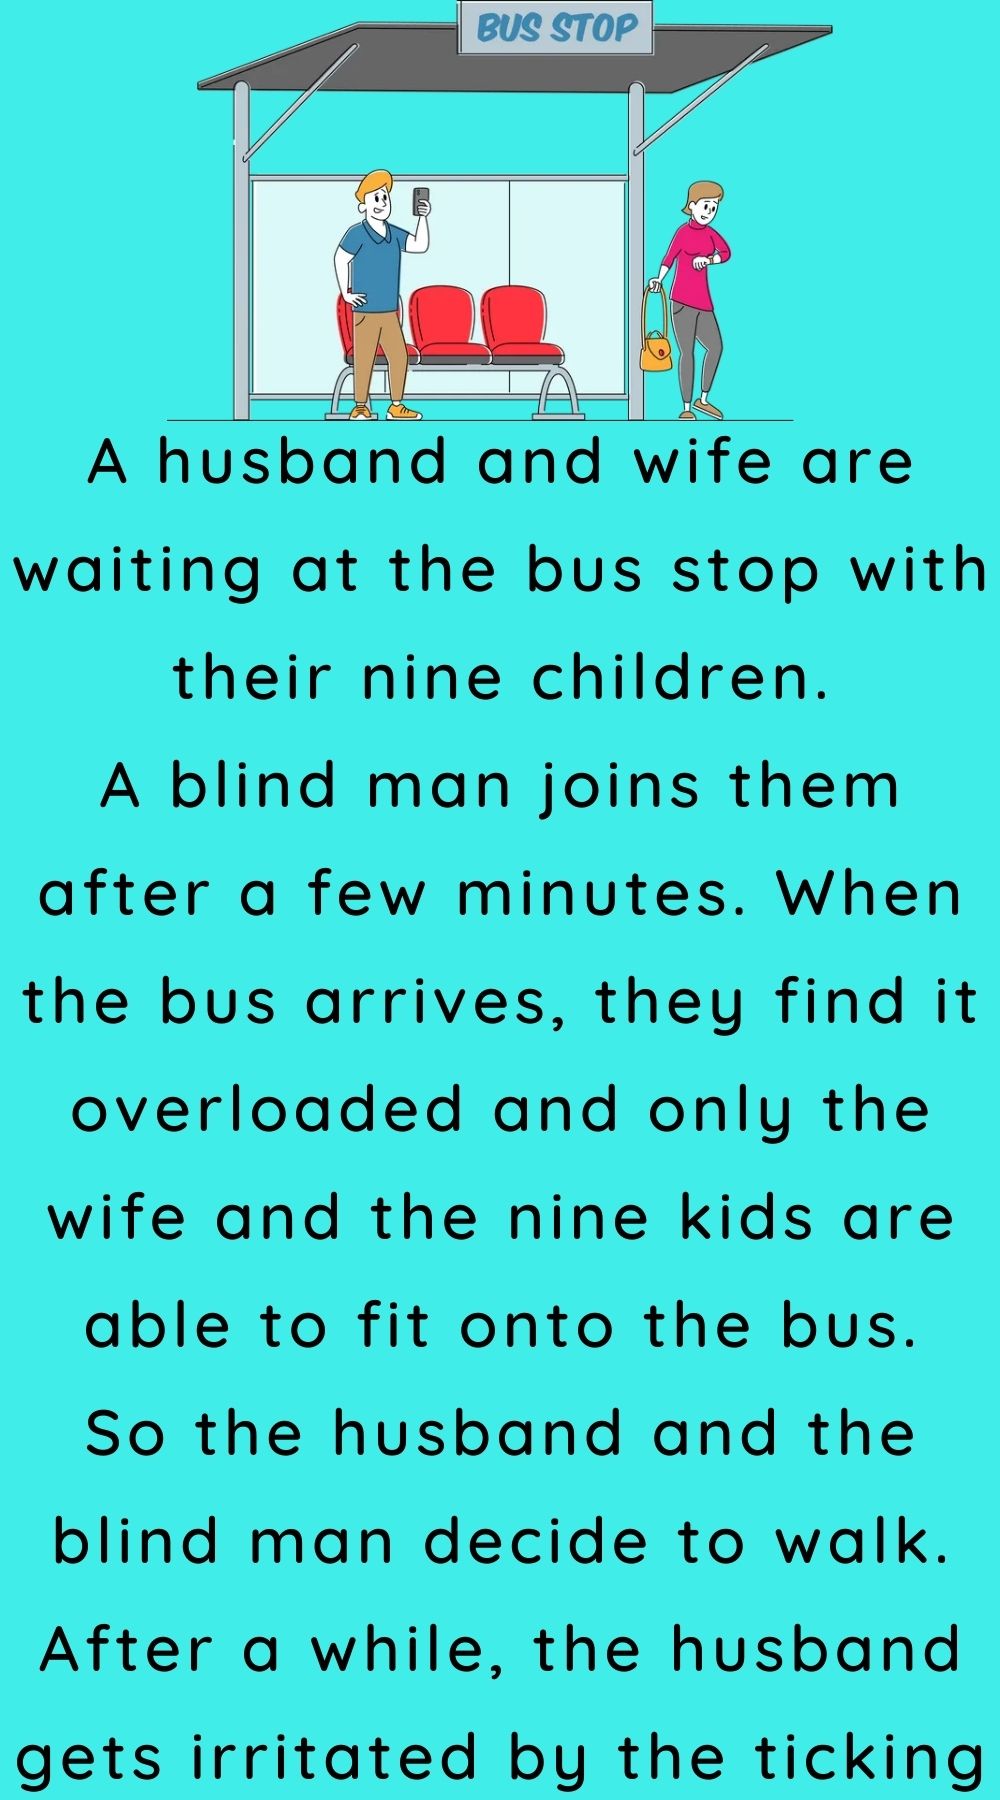 A husband and wife are waiting at the bus stop